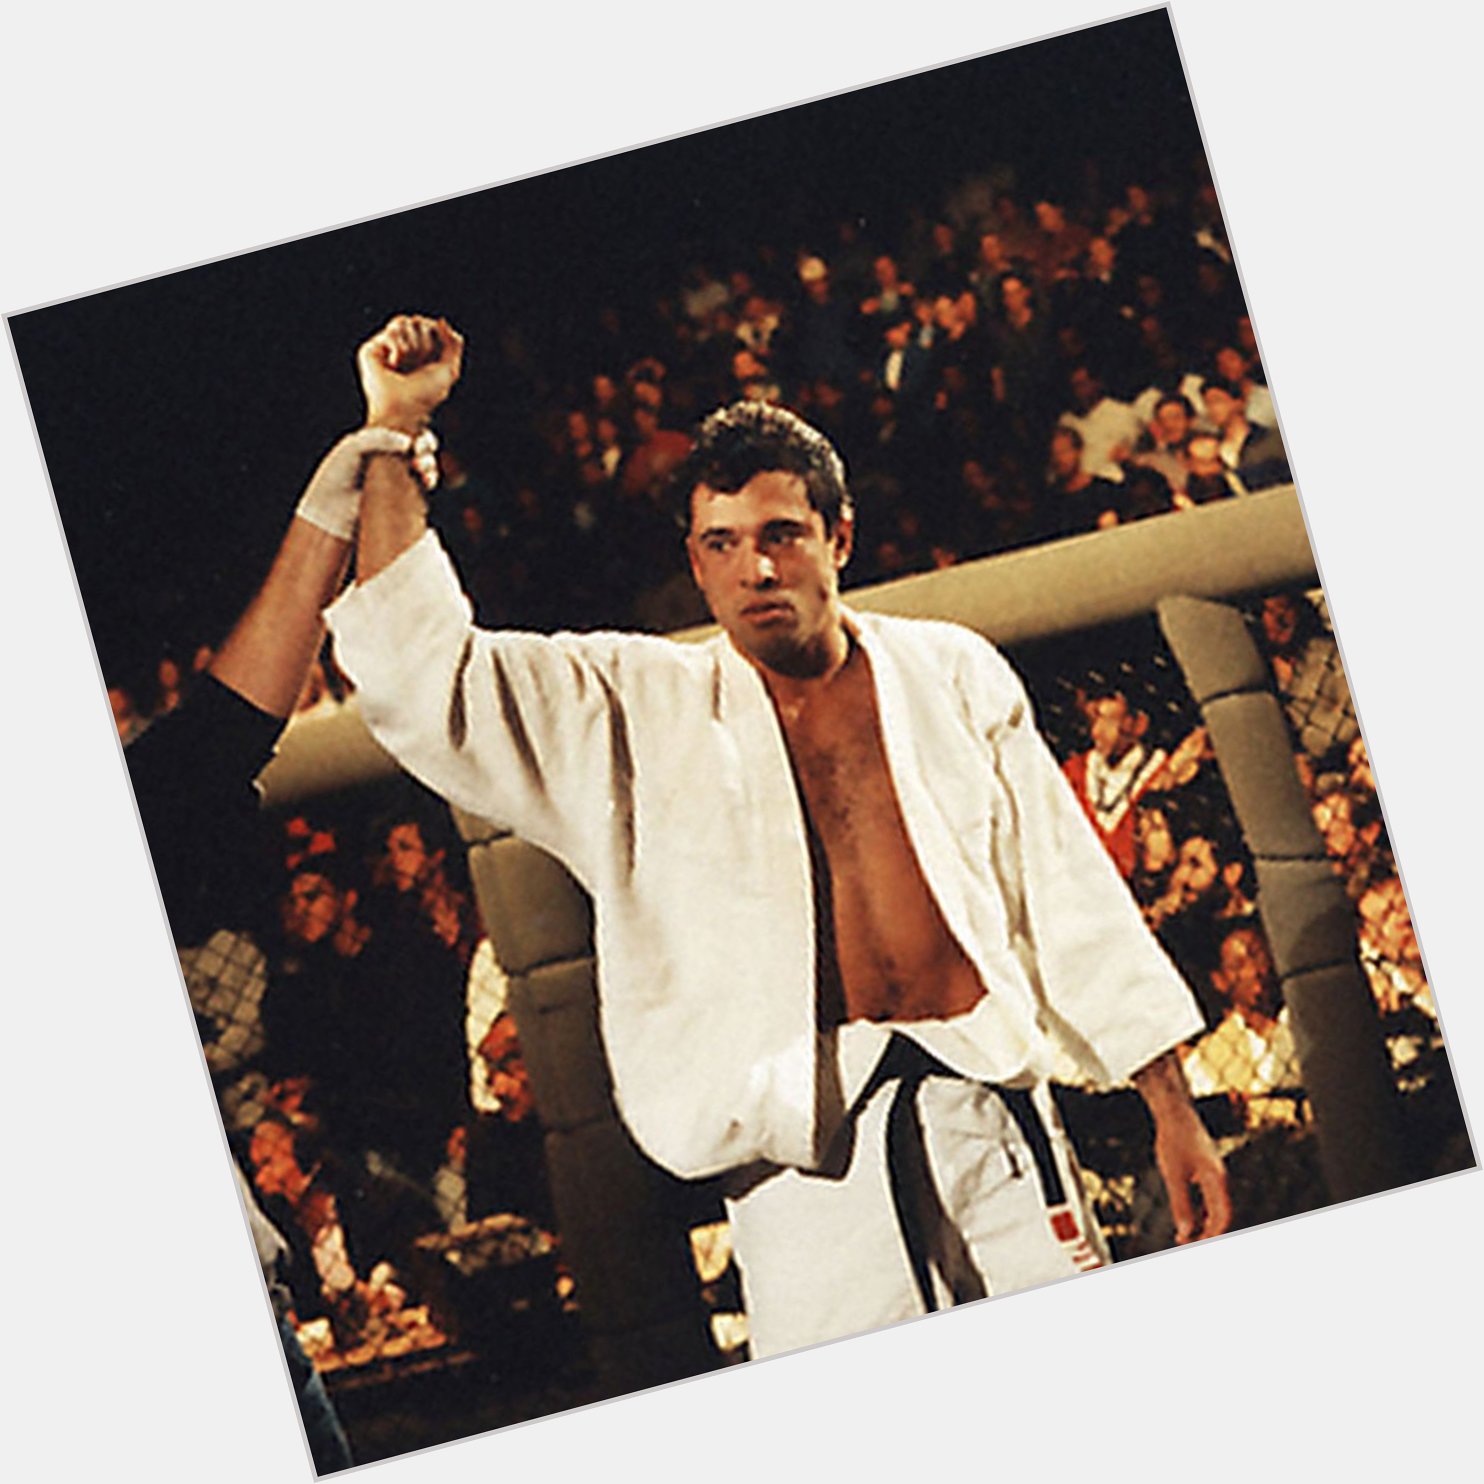 Happy 53rd birthday to the man that changed martial arts forever.

Happy birthday to Royce Gracie. 